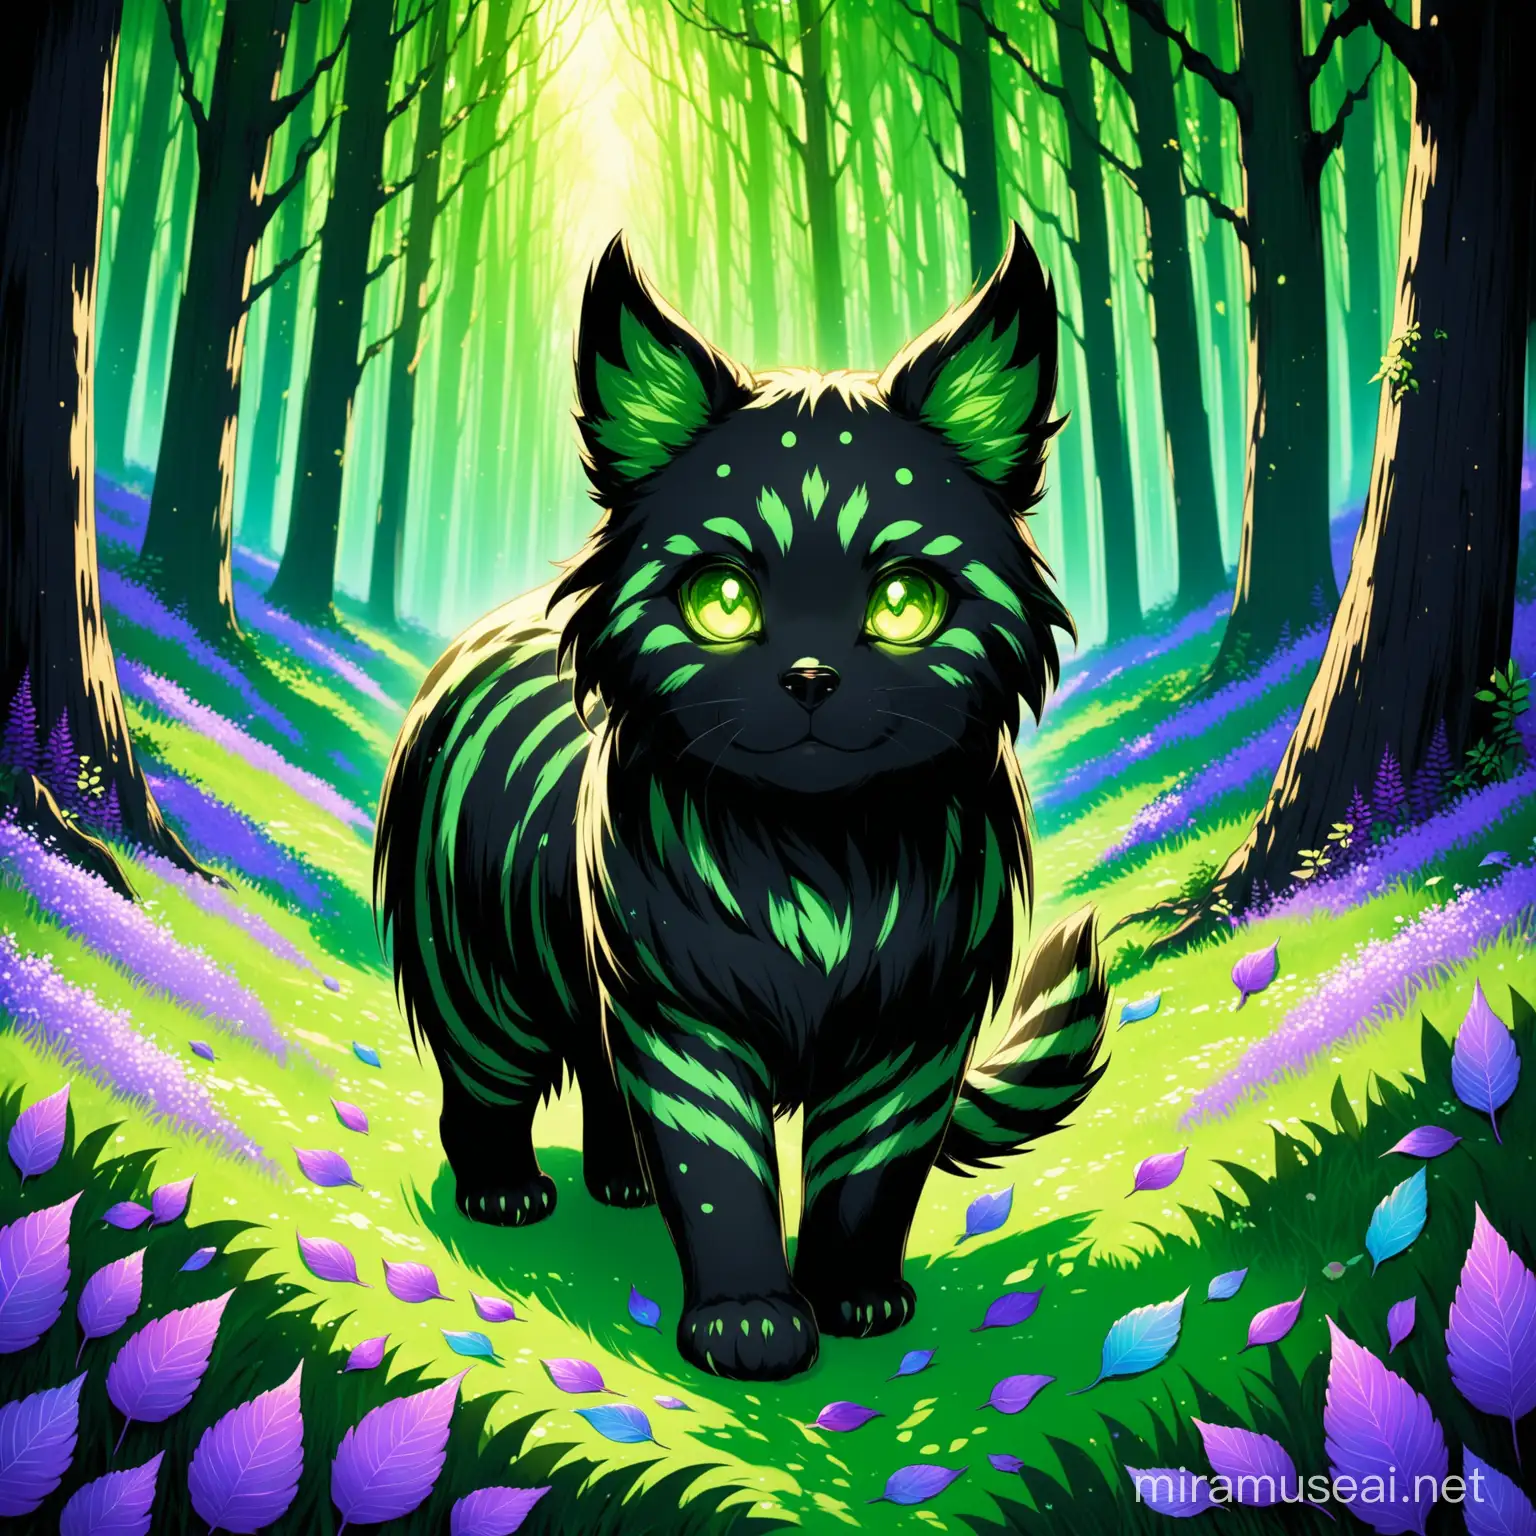 Verdant's ears are dark green with black tips, like leaves illuminated by shadow.  Its face is decorated with greenish-black stripes, reminiscent of the patterns on flower petals.  The paws are covered with green stripes, which turn into black fringe along the edges.  His body is decorated with greenish-black spots, arranged as if it were a painting of nature intertwined with the shadows of the forest, he is in a fantastic forest shimmering with purple and blue colors.